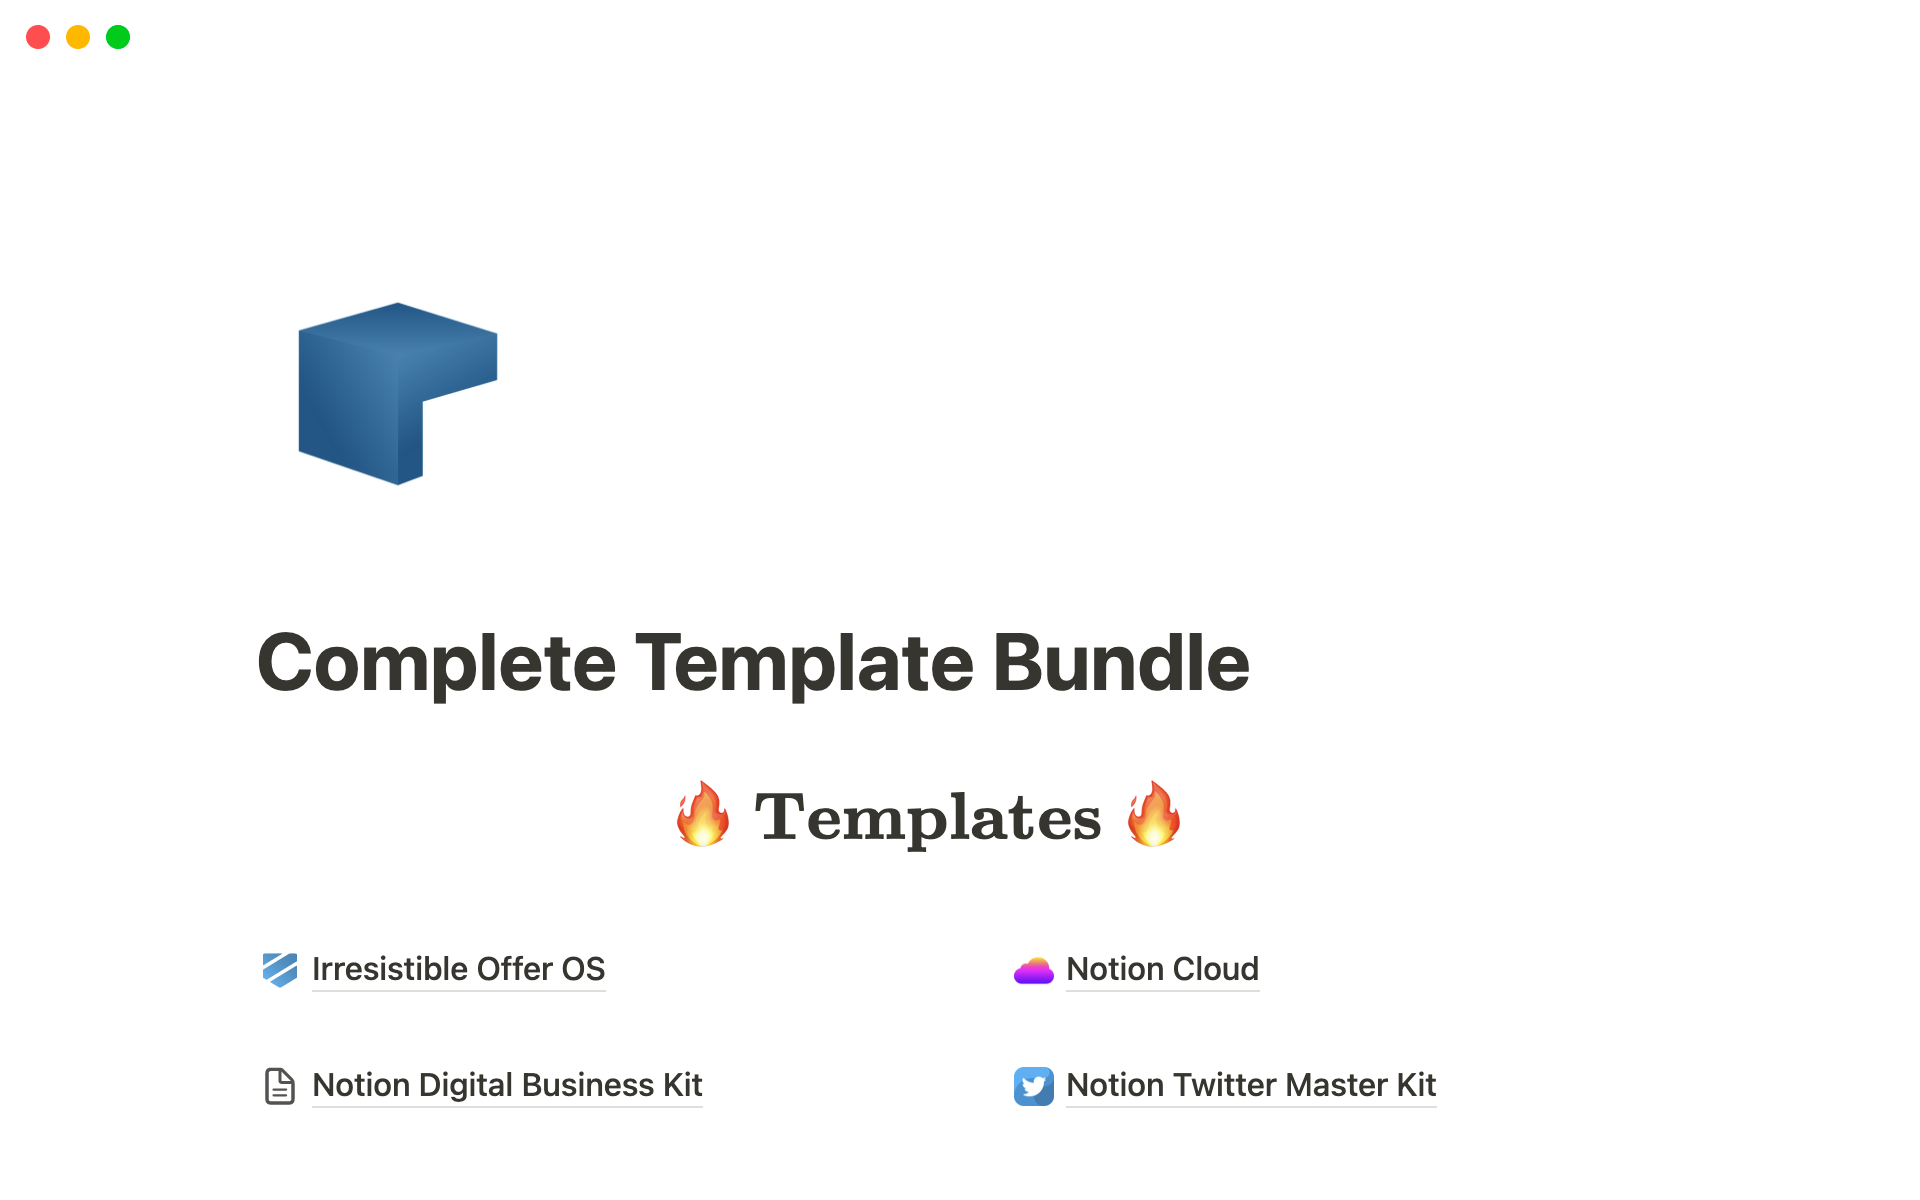 The Complete Template Bundle is the entirety of my portfolio in one bundle.